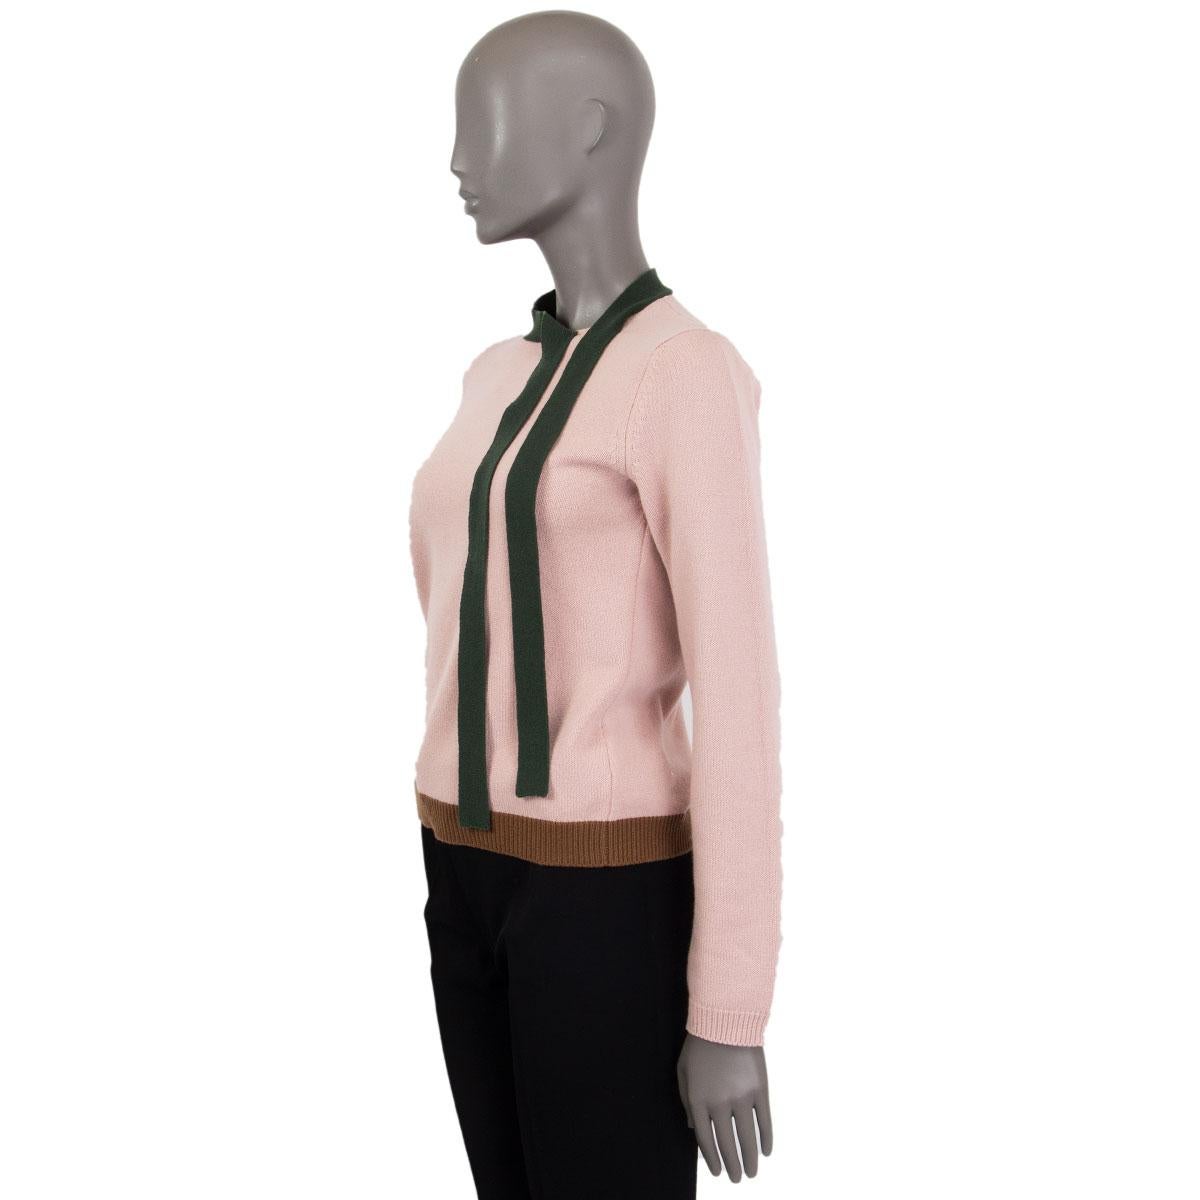 Valentino sweater in pale rose wool-cashmere blend (please note content tag has been removed) with a brown ribbed hem and bow-collar detail in forest green. Has been worn and is in excellent condition. 

Tag Size Missing
Size S
Shoulder Width 39cm